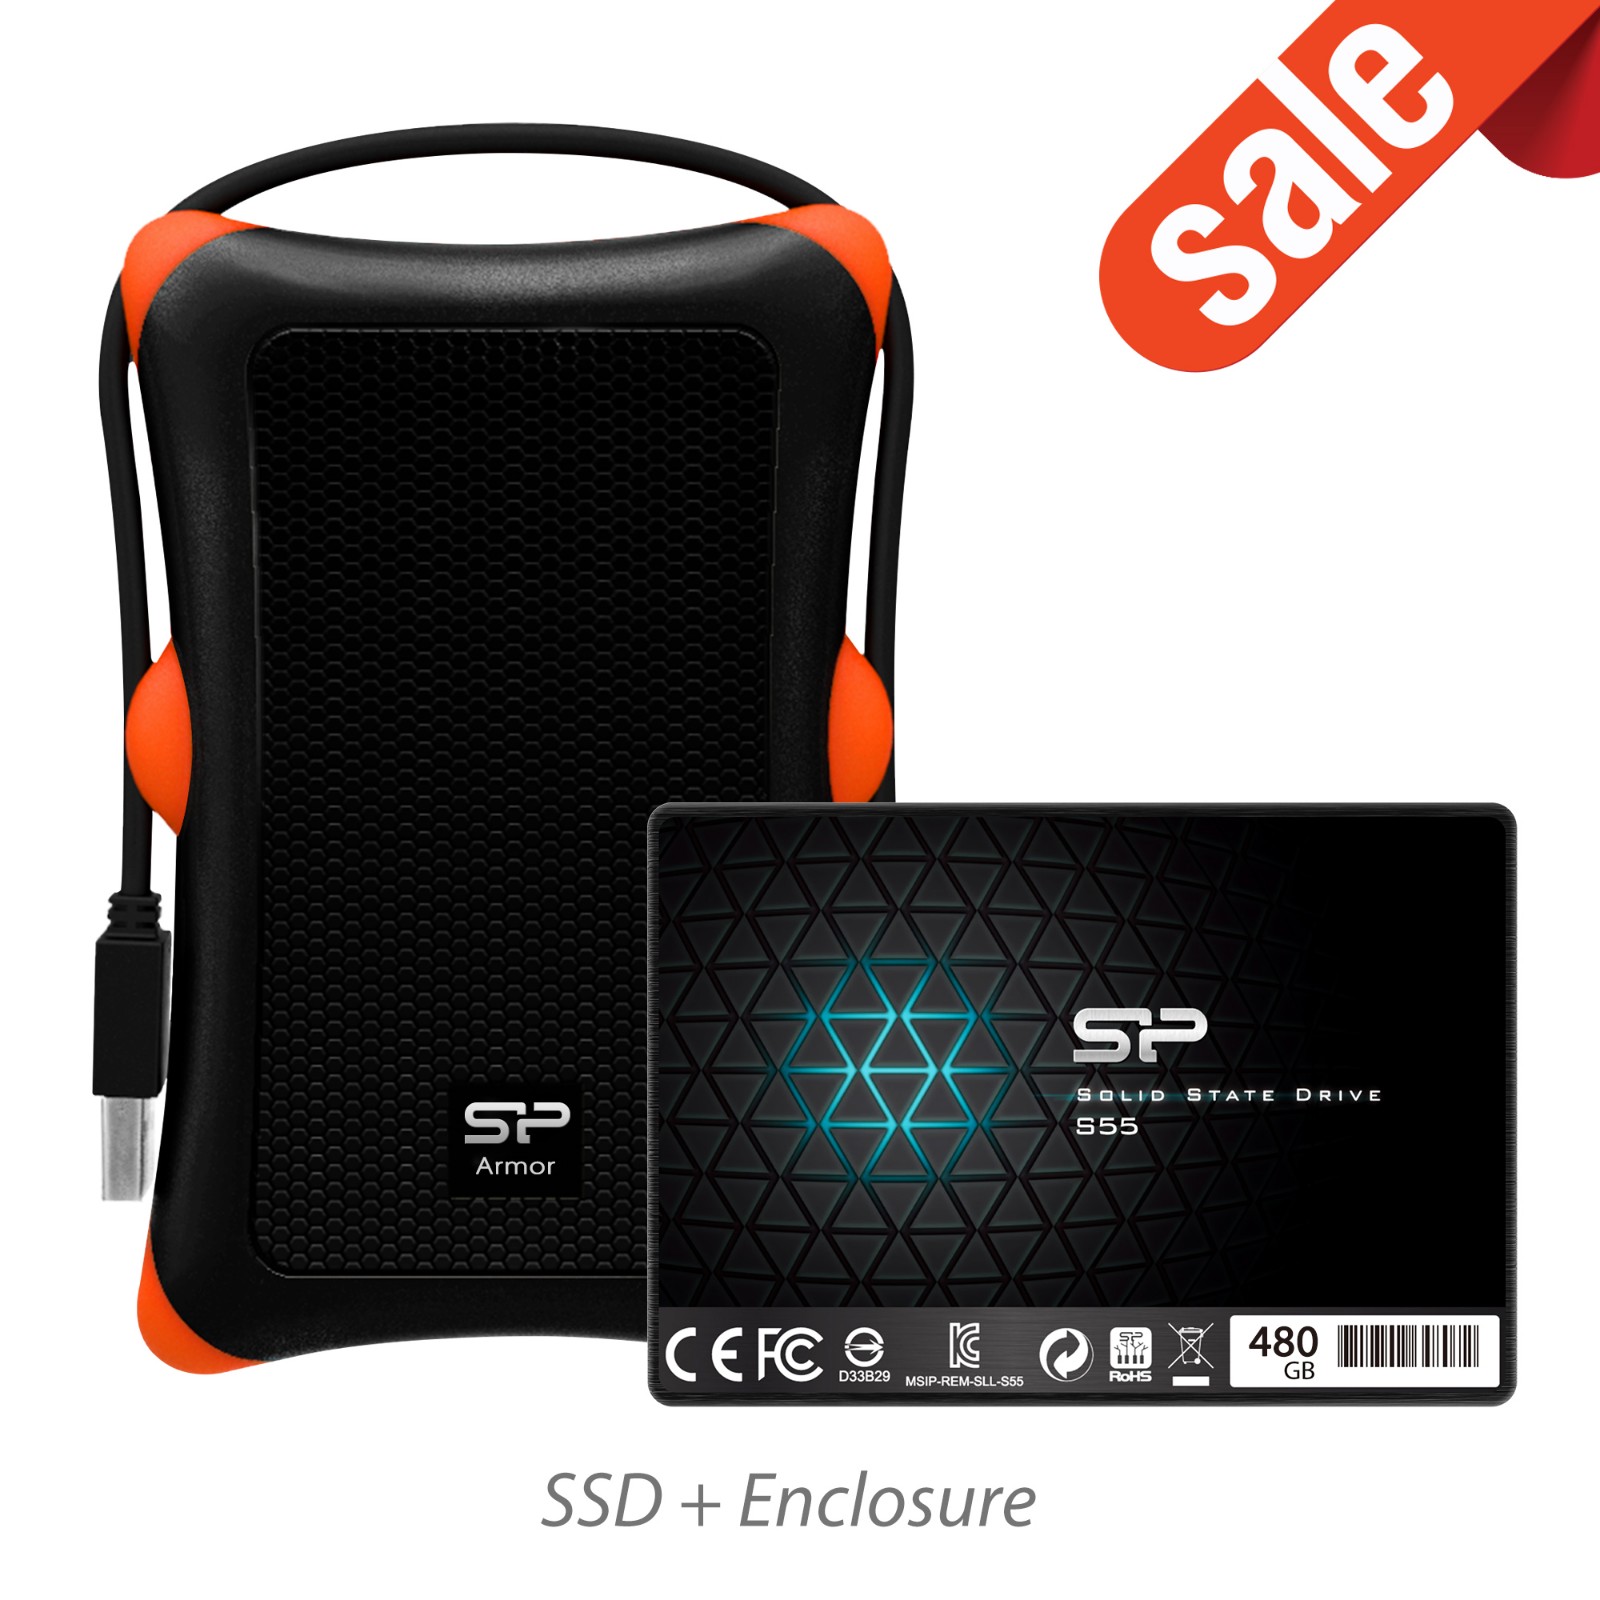 Silicon Power 480GB SSD Upgrade Installation Kit S55 w/shockproof enclosure